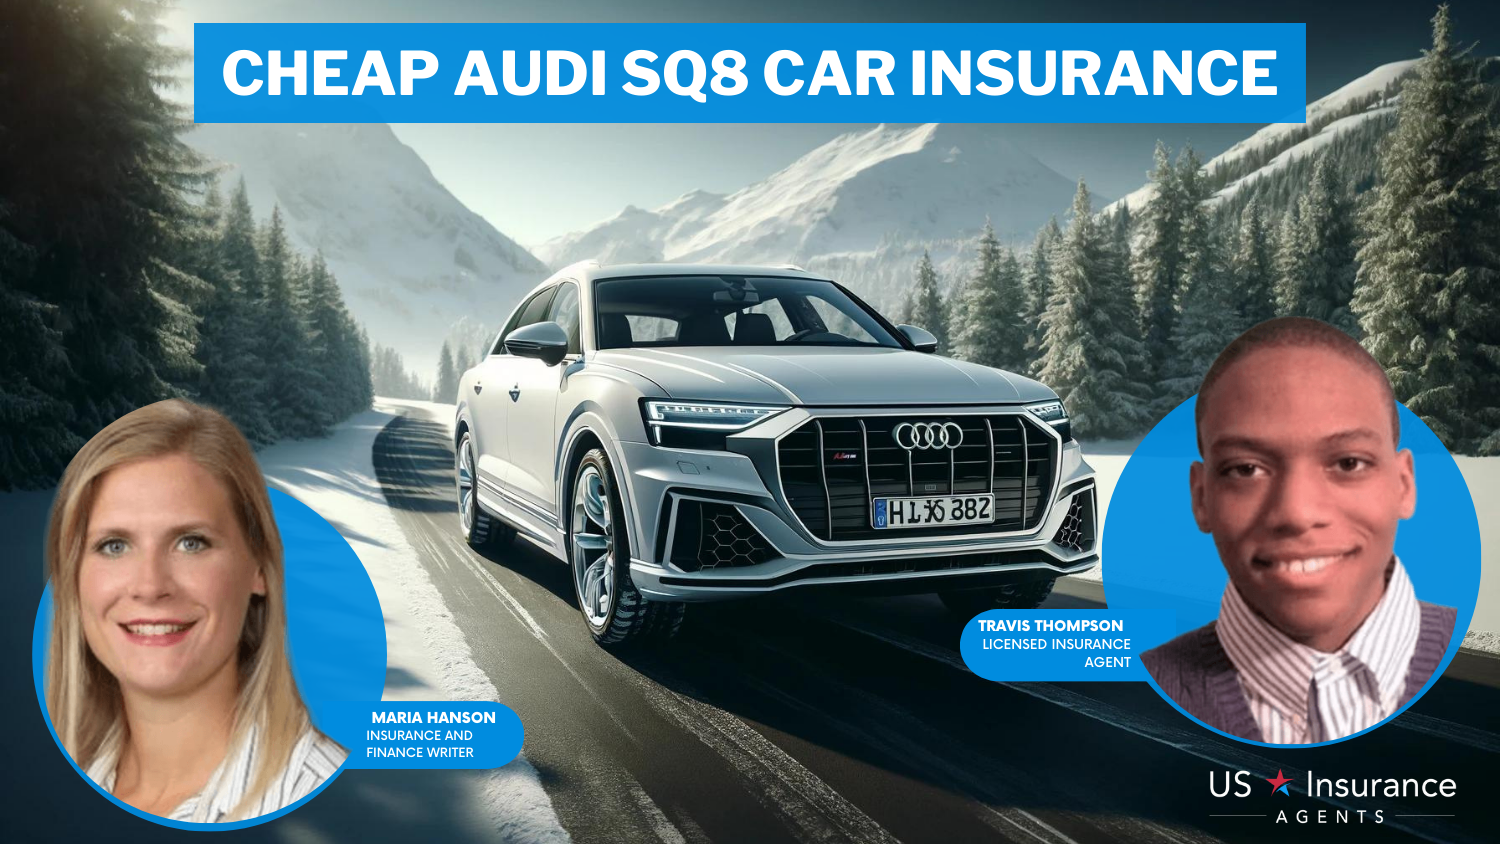 Cheap Audi SQ8 Car Insurance: American Family, State Farm, Auto-Owners